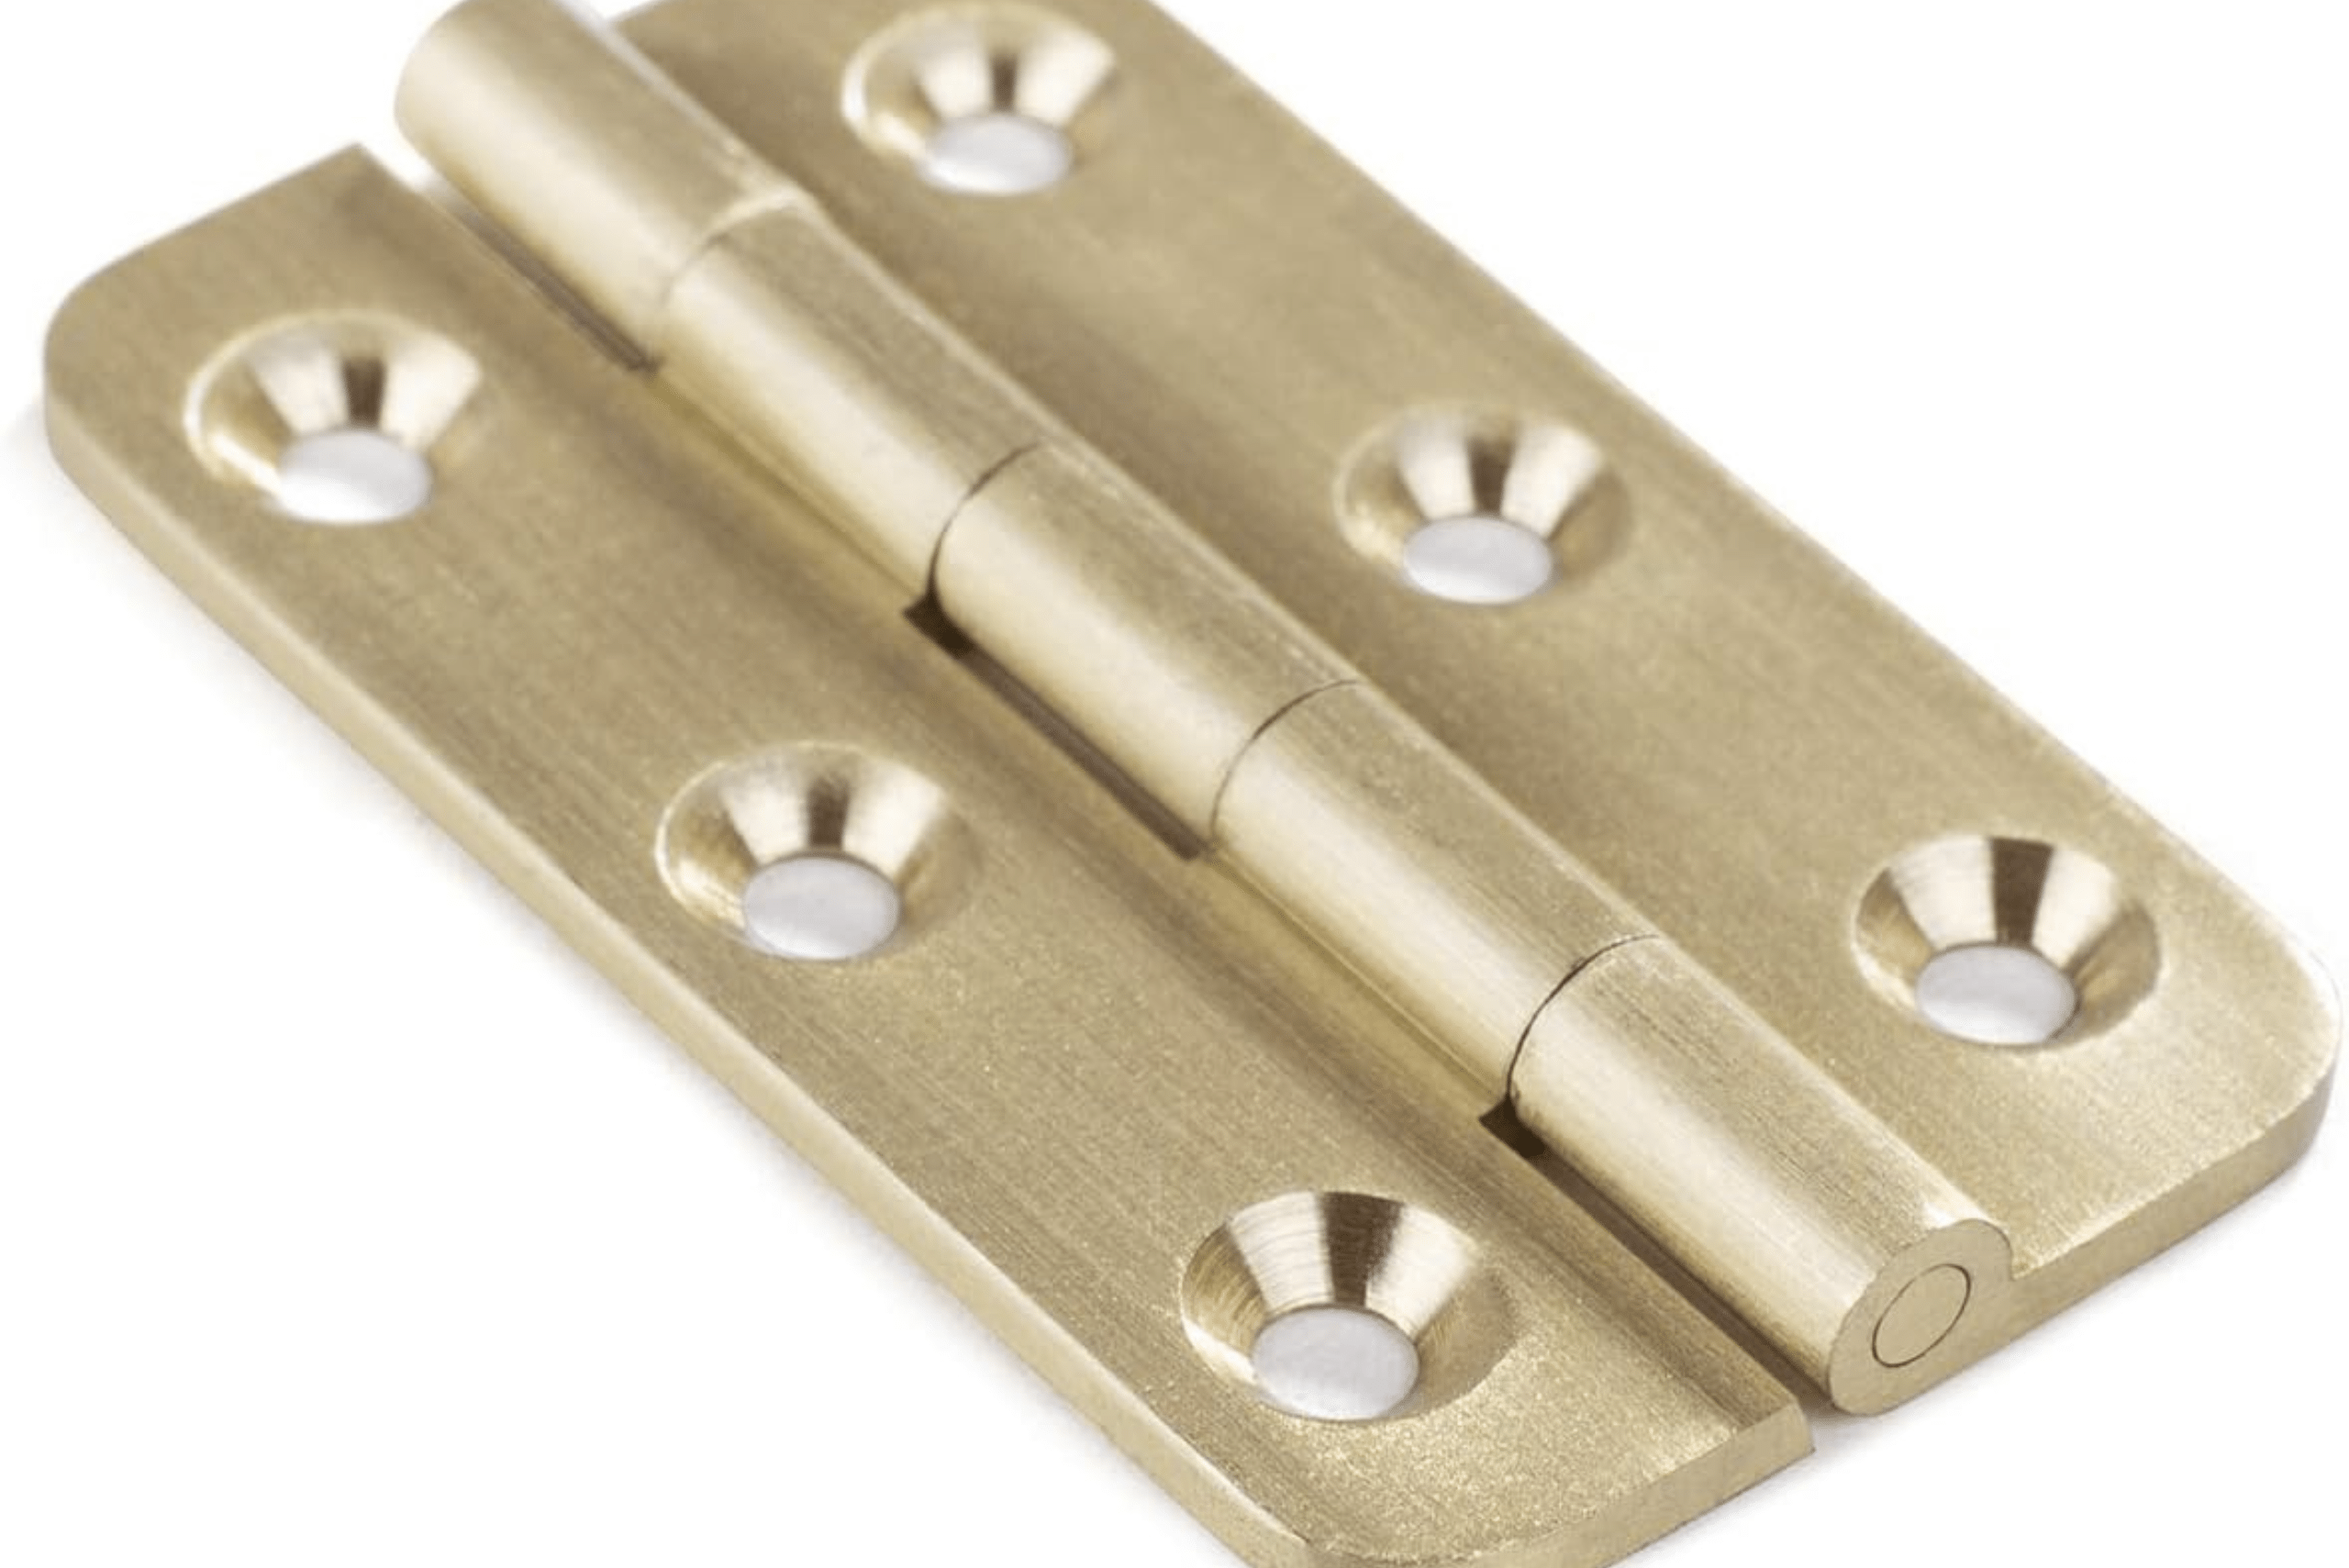 Product image of a butt hinge.